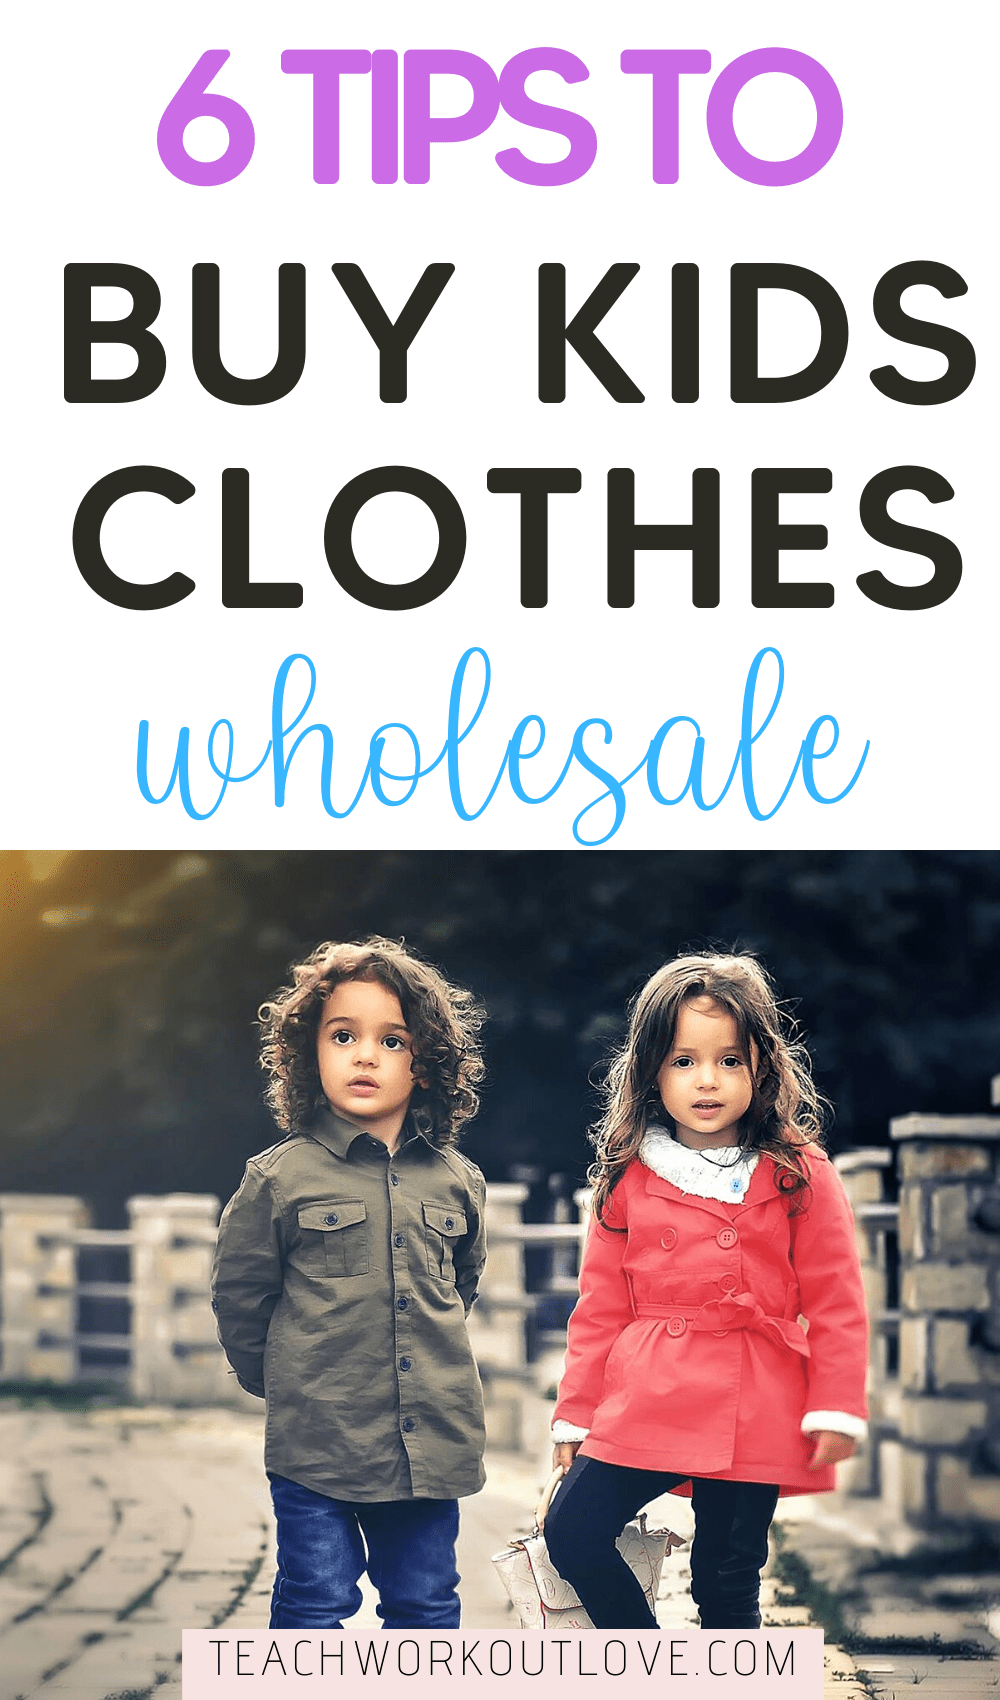 You can buy baby clothes online nowadays. That is why if you are first-time parents, you need these 6 tips to know how to buy kids clothes wholesale.